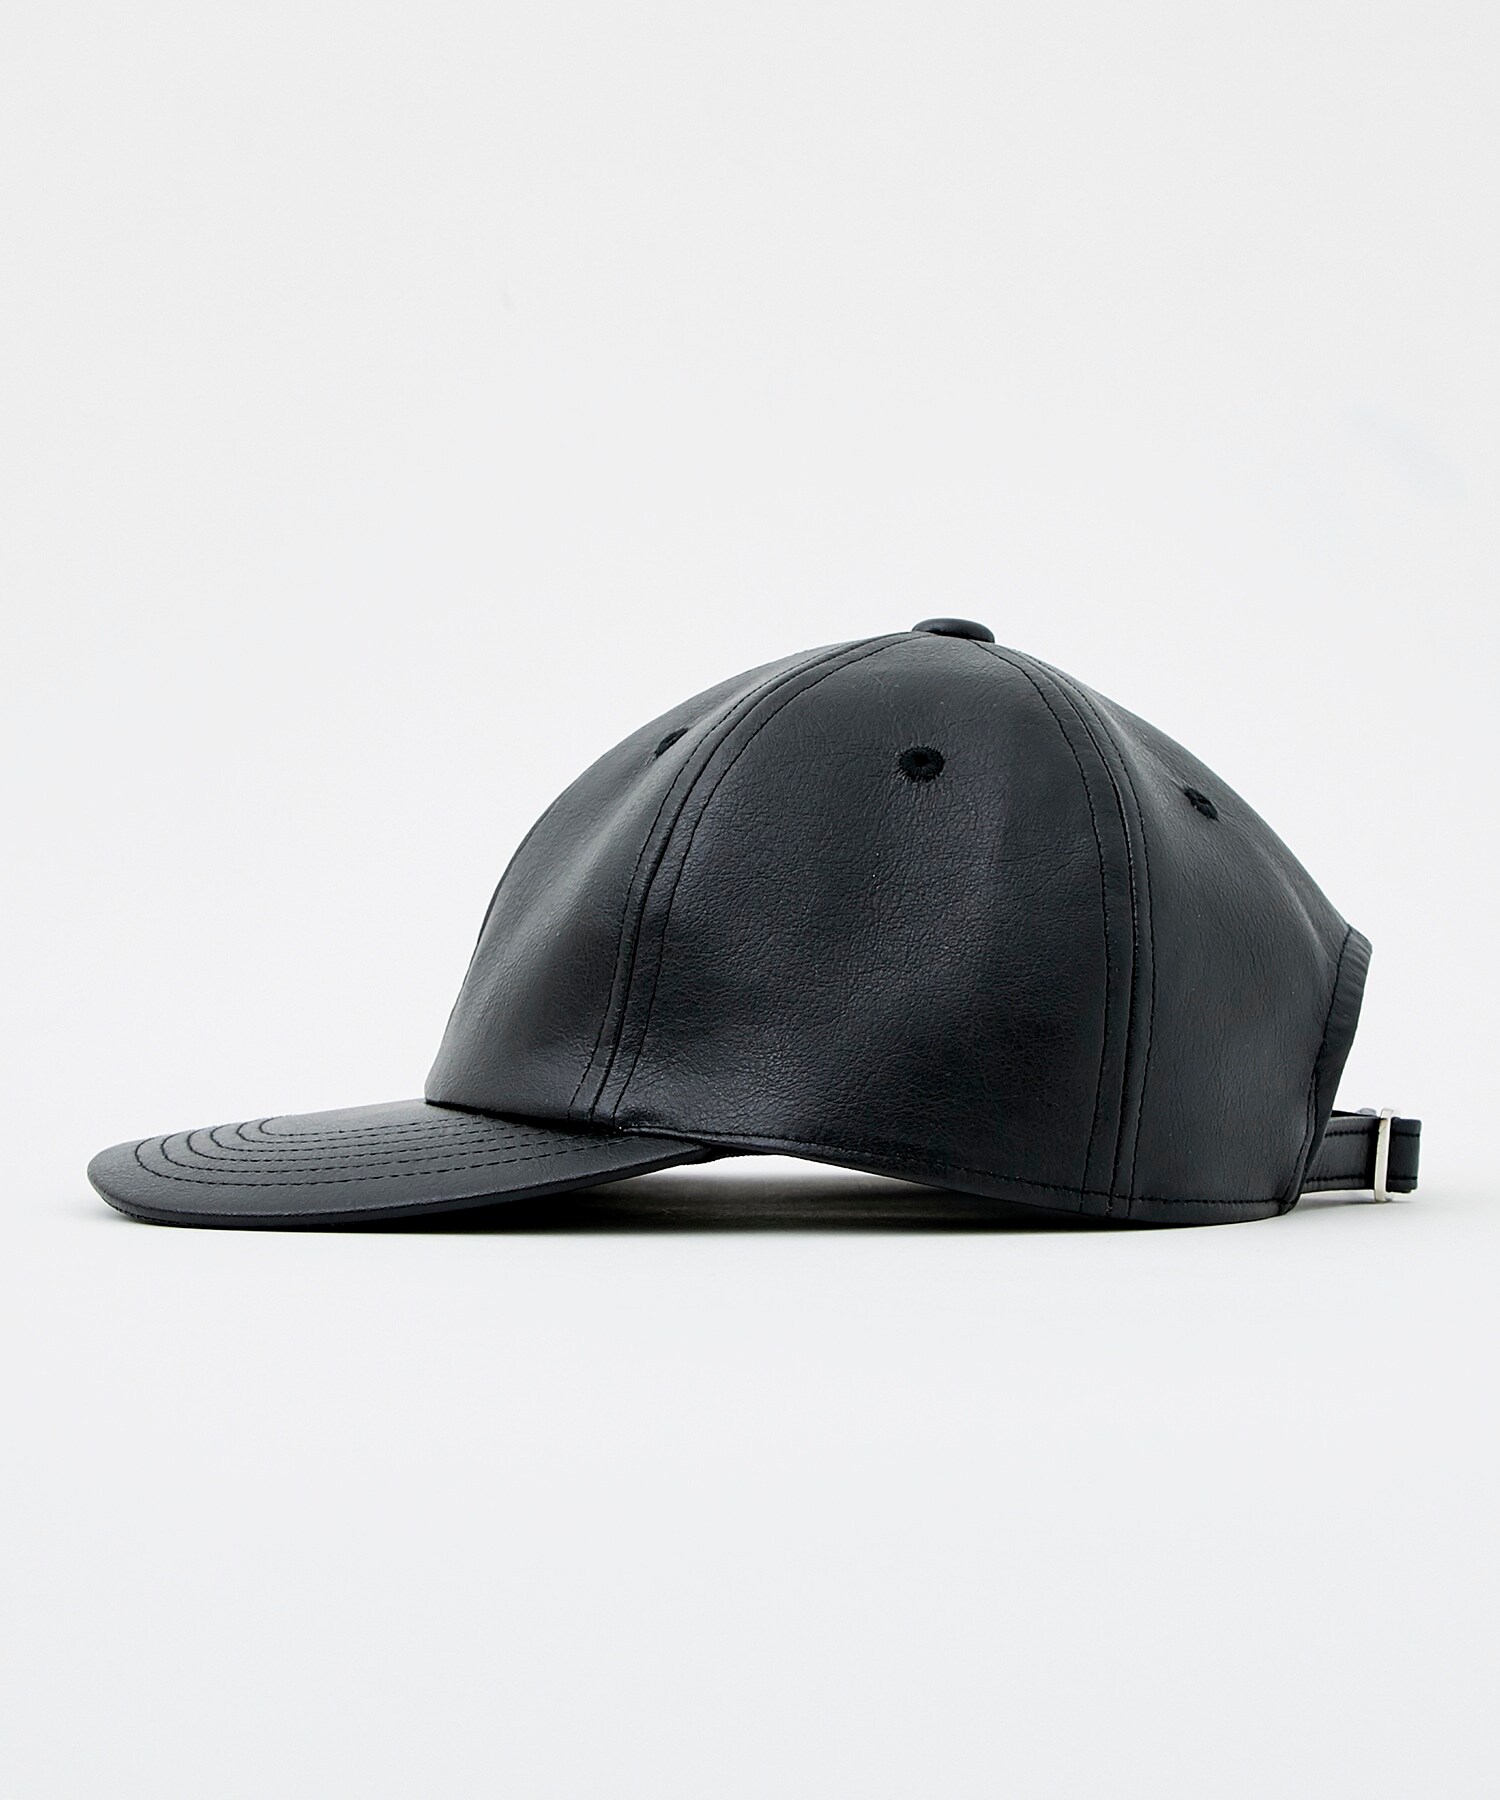 SYNTHETIC LEATHER 6PANEL CAP